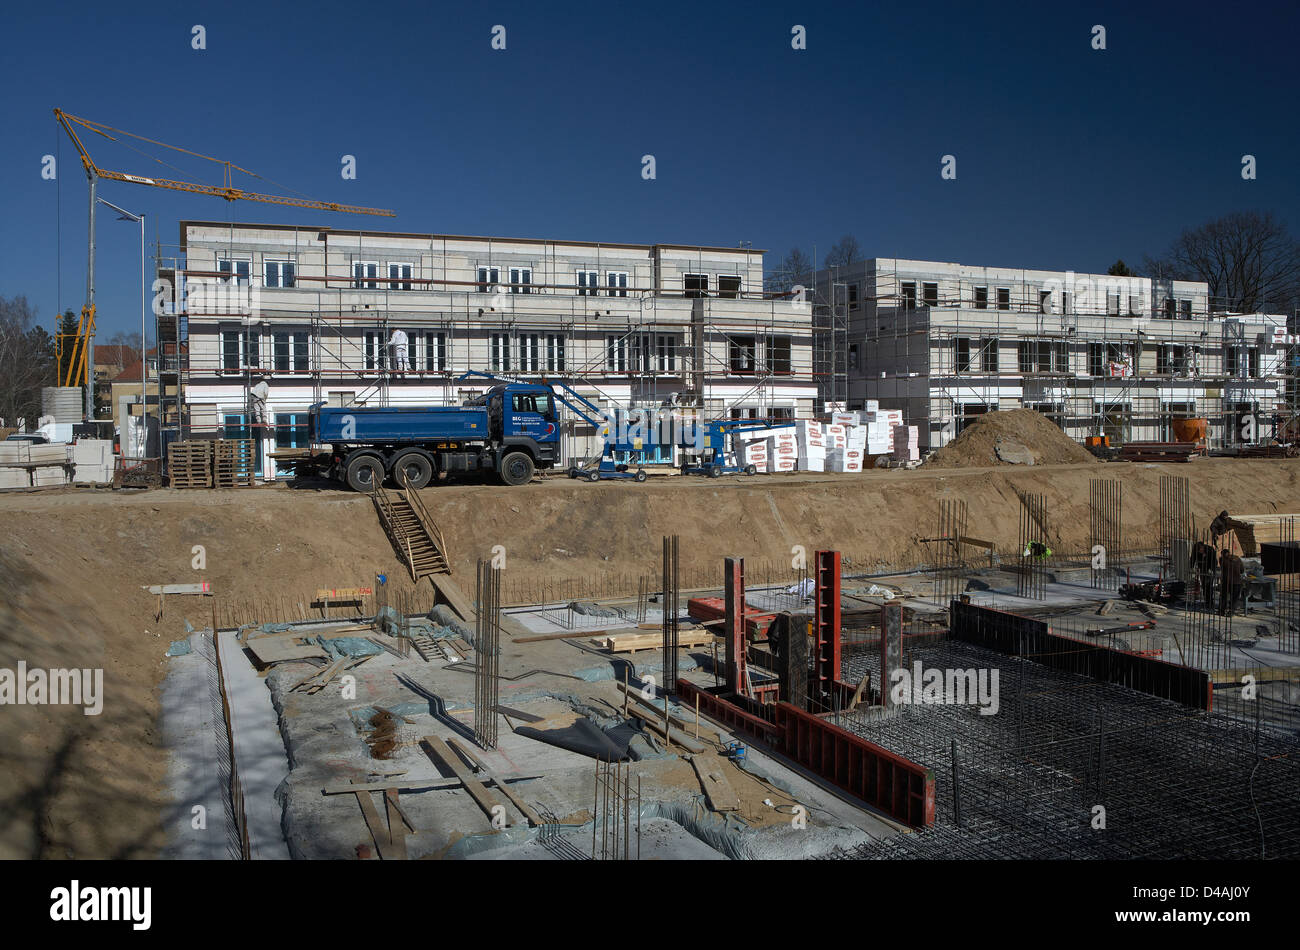 Okohaus Settlement Lentzeallee High Resolution Stock Photography And Images Alamy